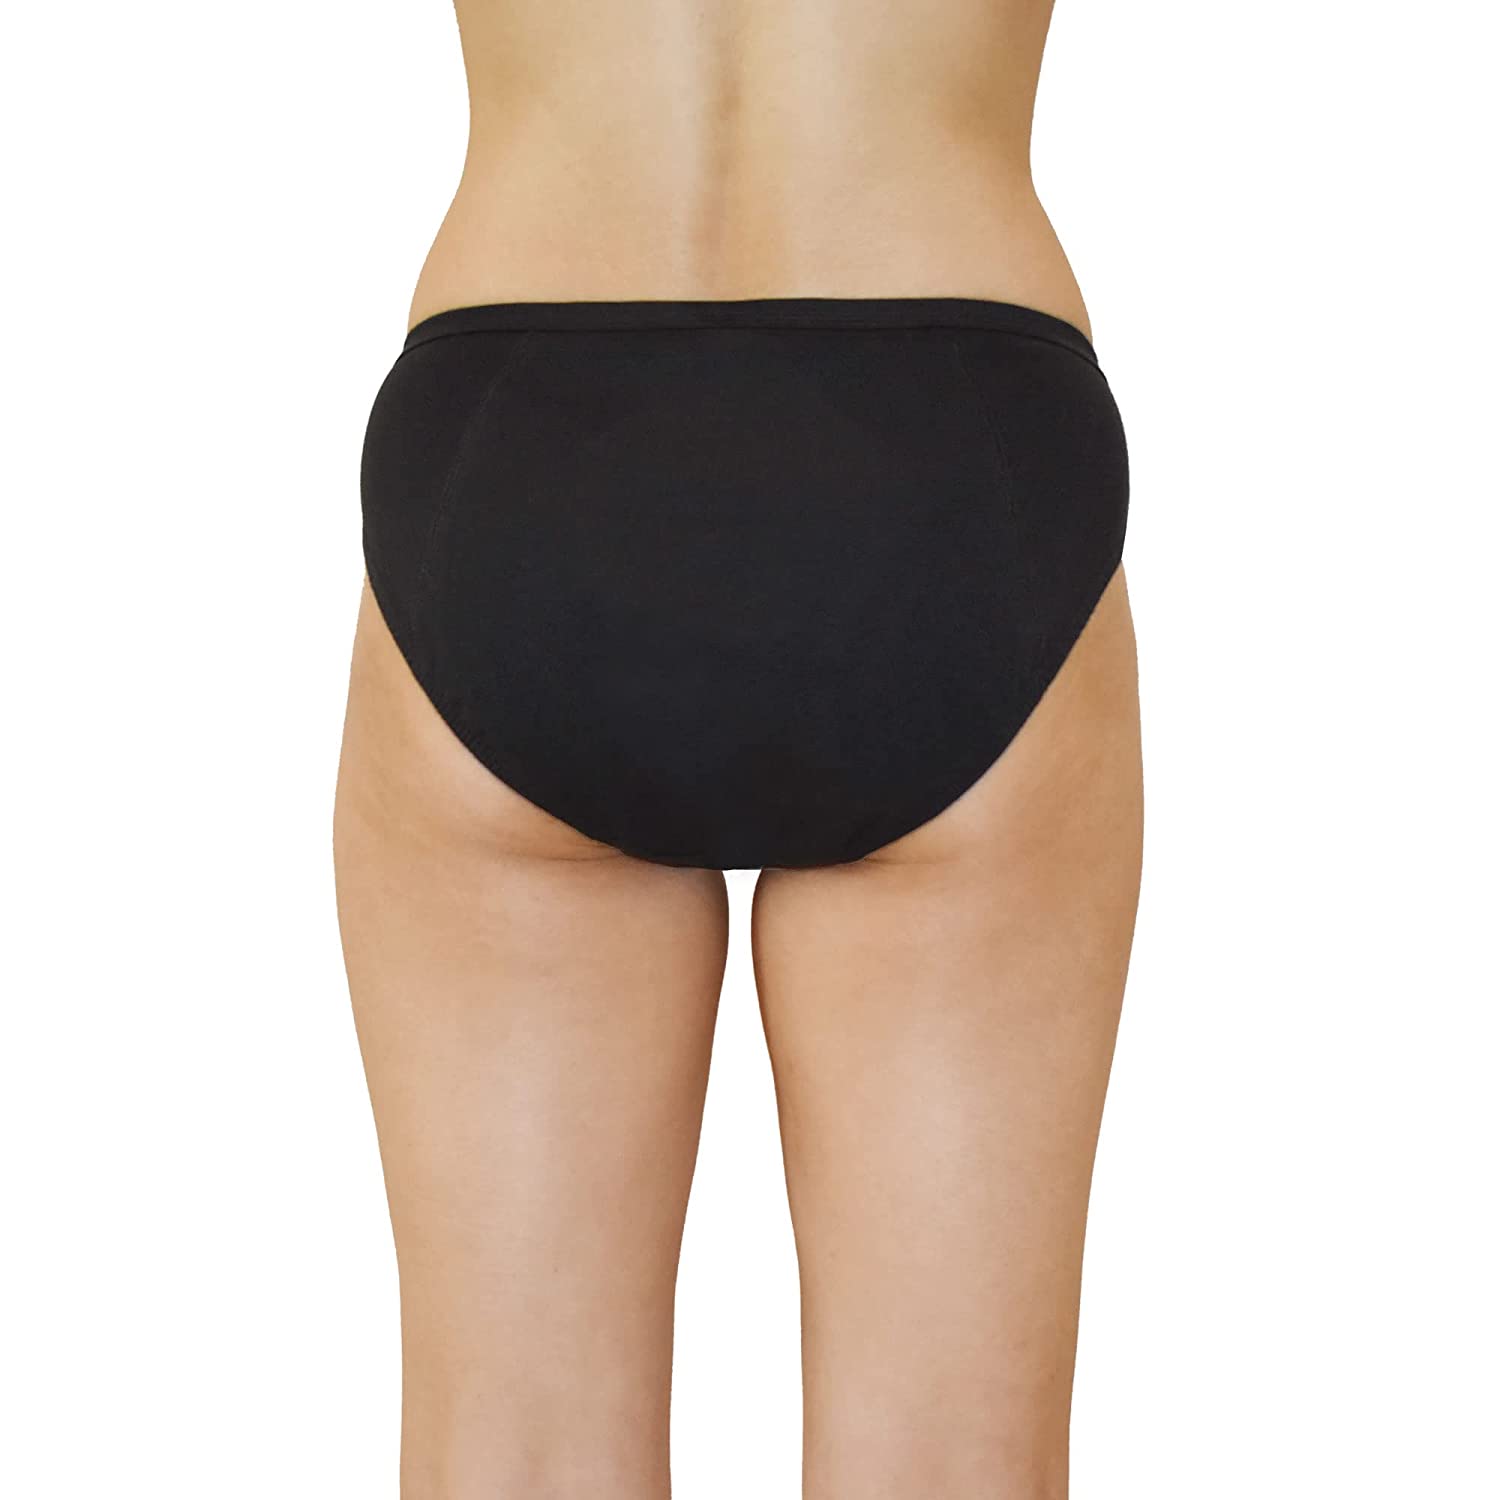 QNIX BacQup Period Panties Reusable  Black Periods Underwear – Sustainable  Stree